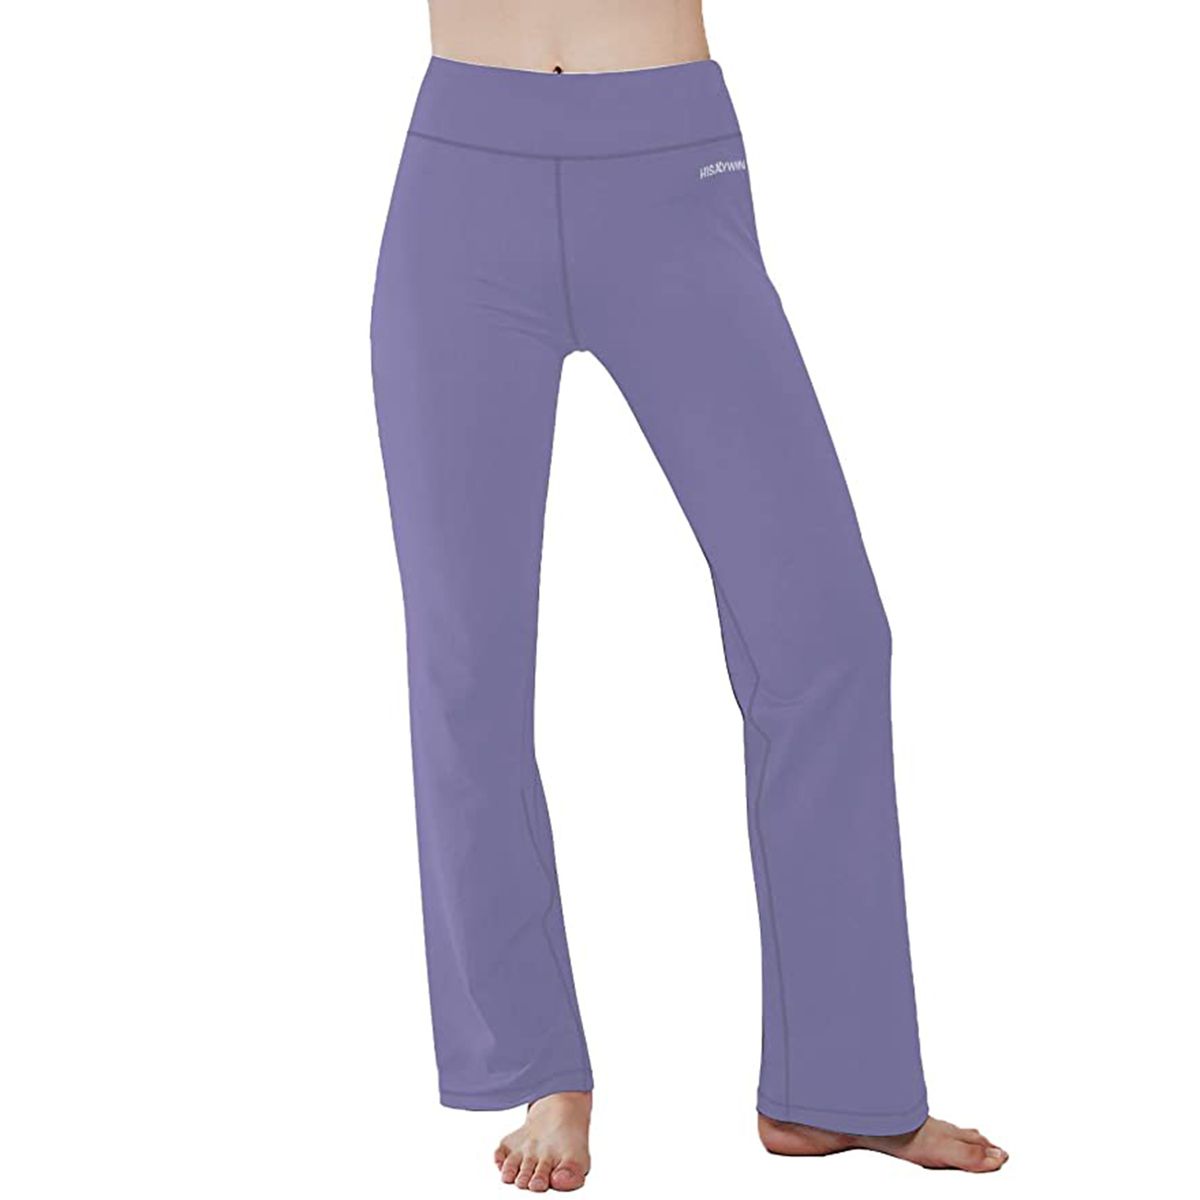 HISKYWIN Inner Pocket Yoga Pants 4 Way Stretch Tummy Control Workout Running Pants